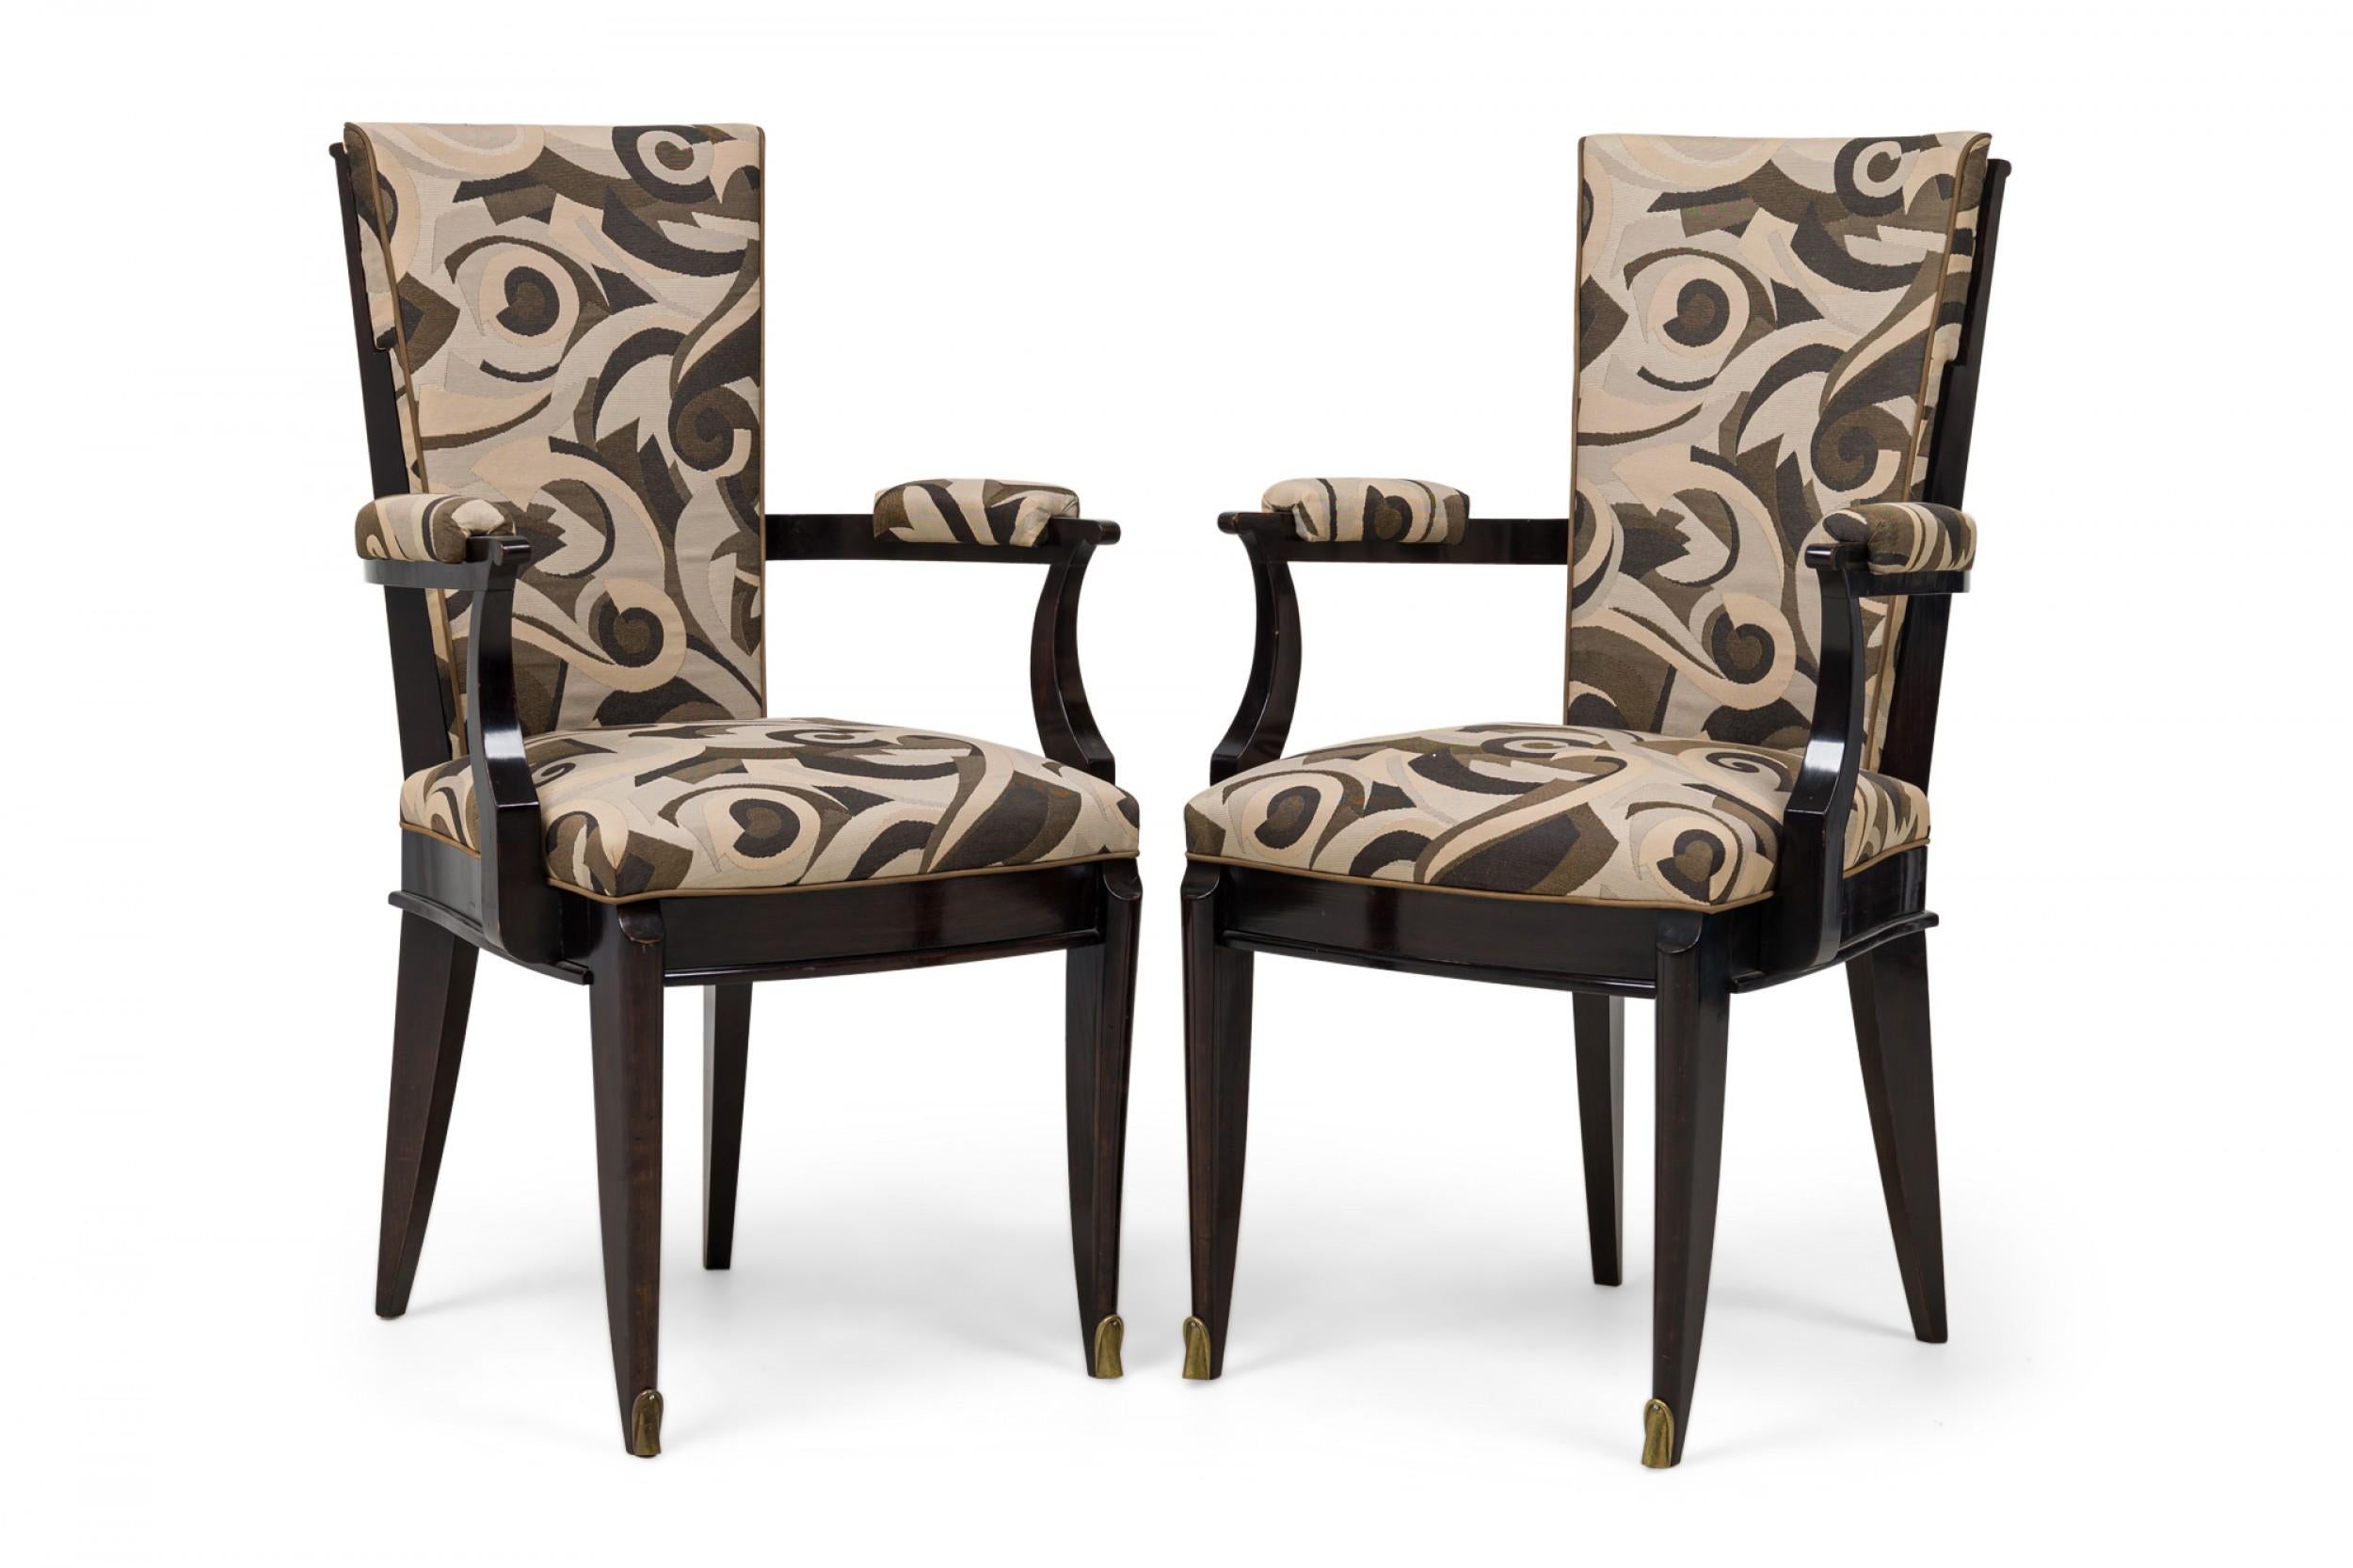 SET of 6 French Art Deco Ebony de Macassar armchairs featuring a tapered rectangular back, scroll arms with armrests, upholstered in an earth tone geometric patterned fabric with piping, molded frieze, the 2 front legs splayed with brass sabots.